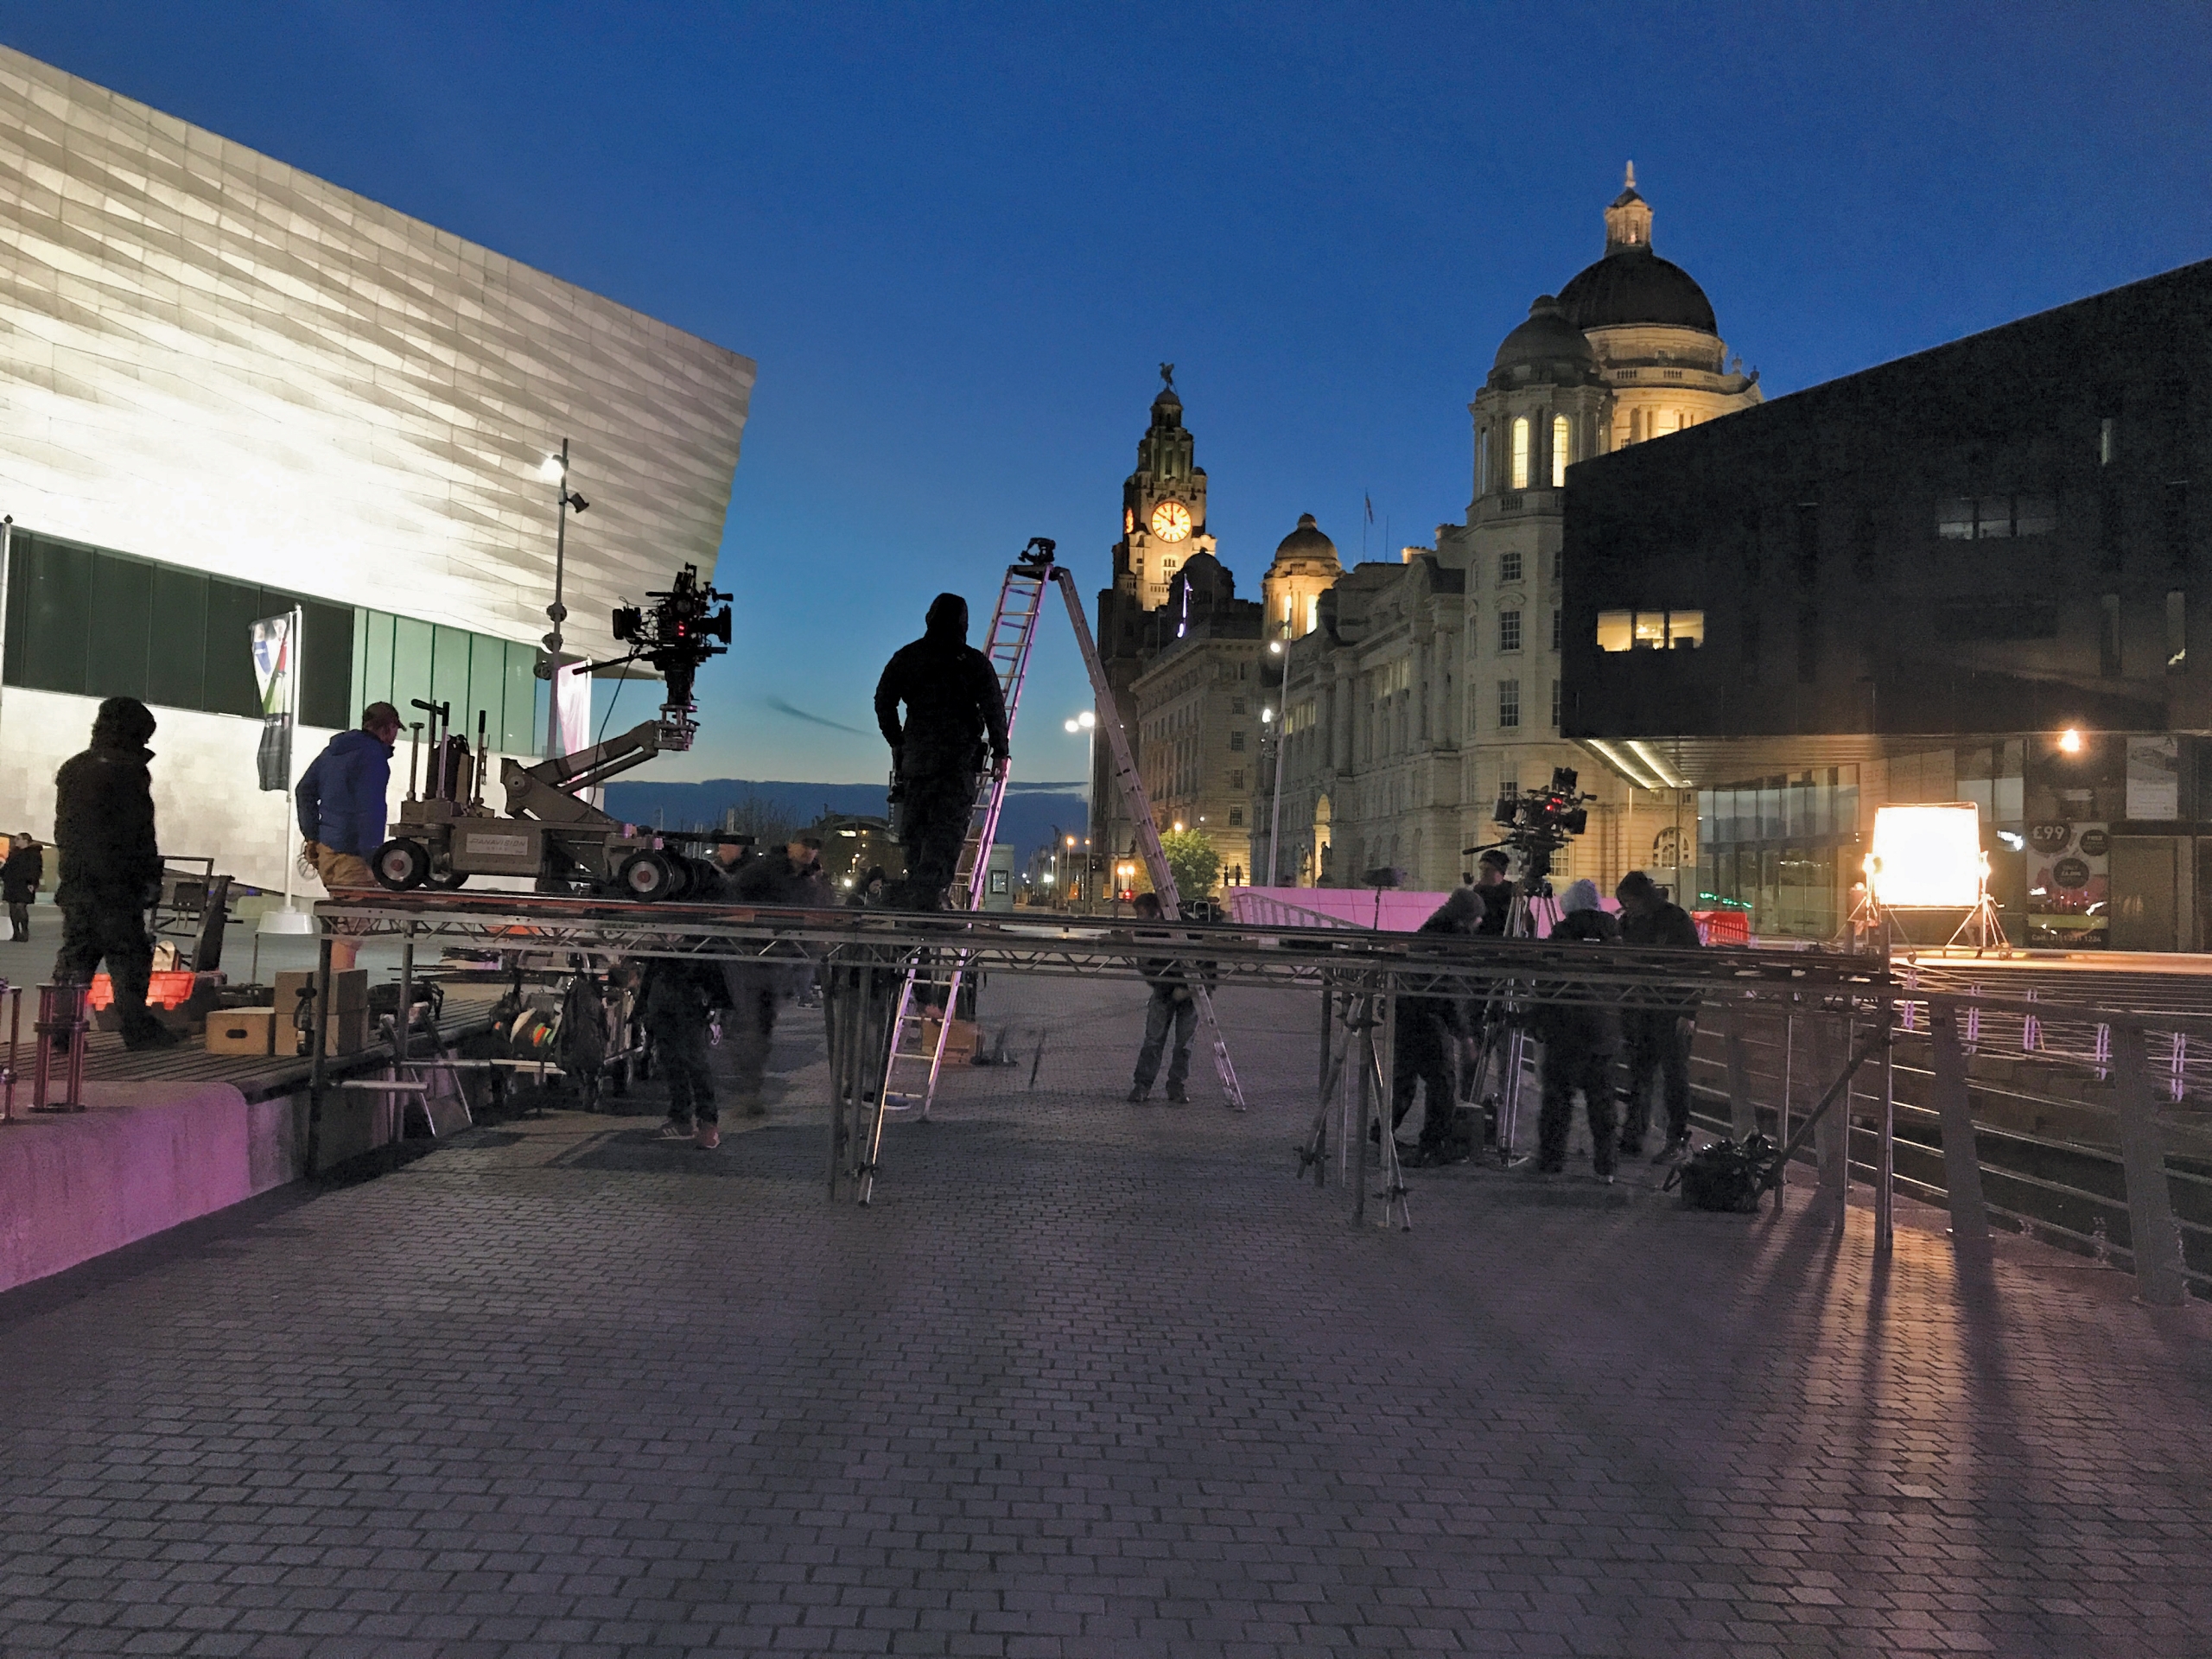 Liverpool waterfont in early evening, film crew filming outside of Liverpool Museum on the flat grey paving and the waterfront buildings are lit up in yellow against the night sky behind the film crew.